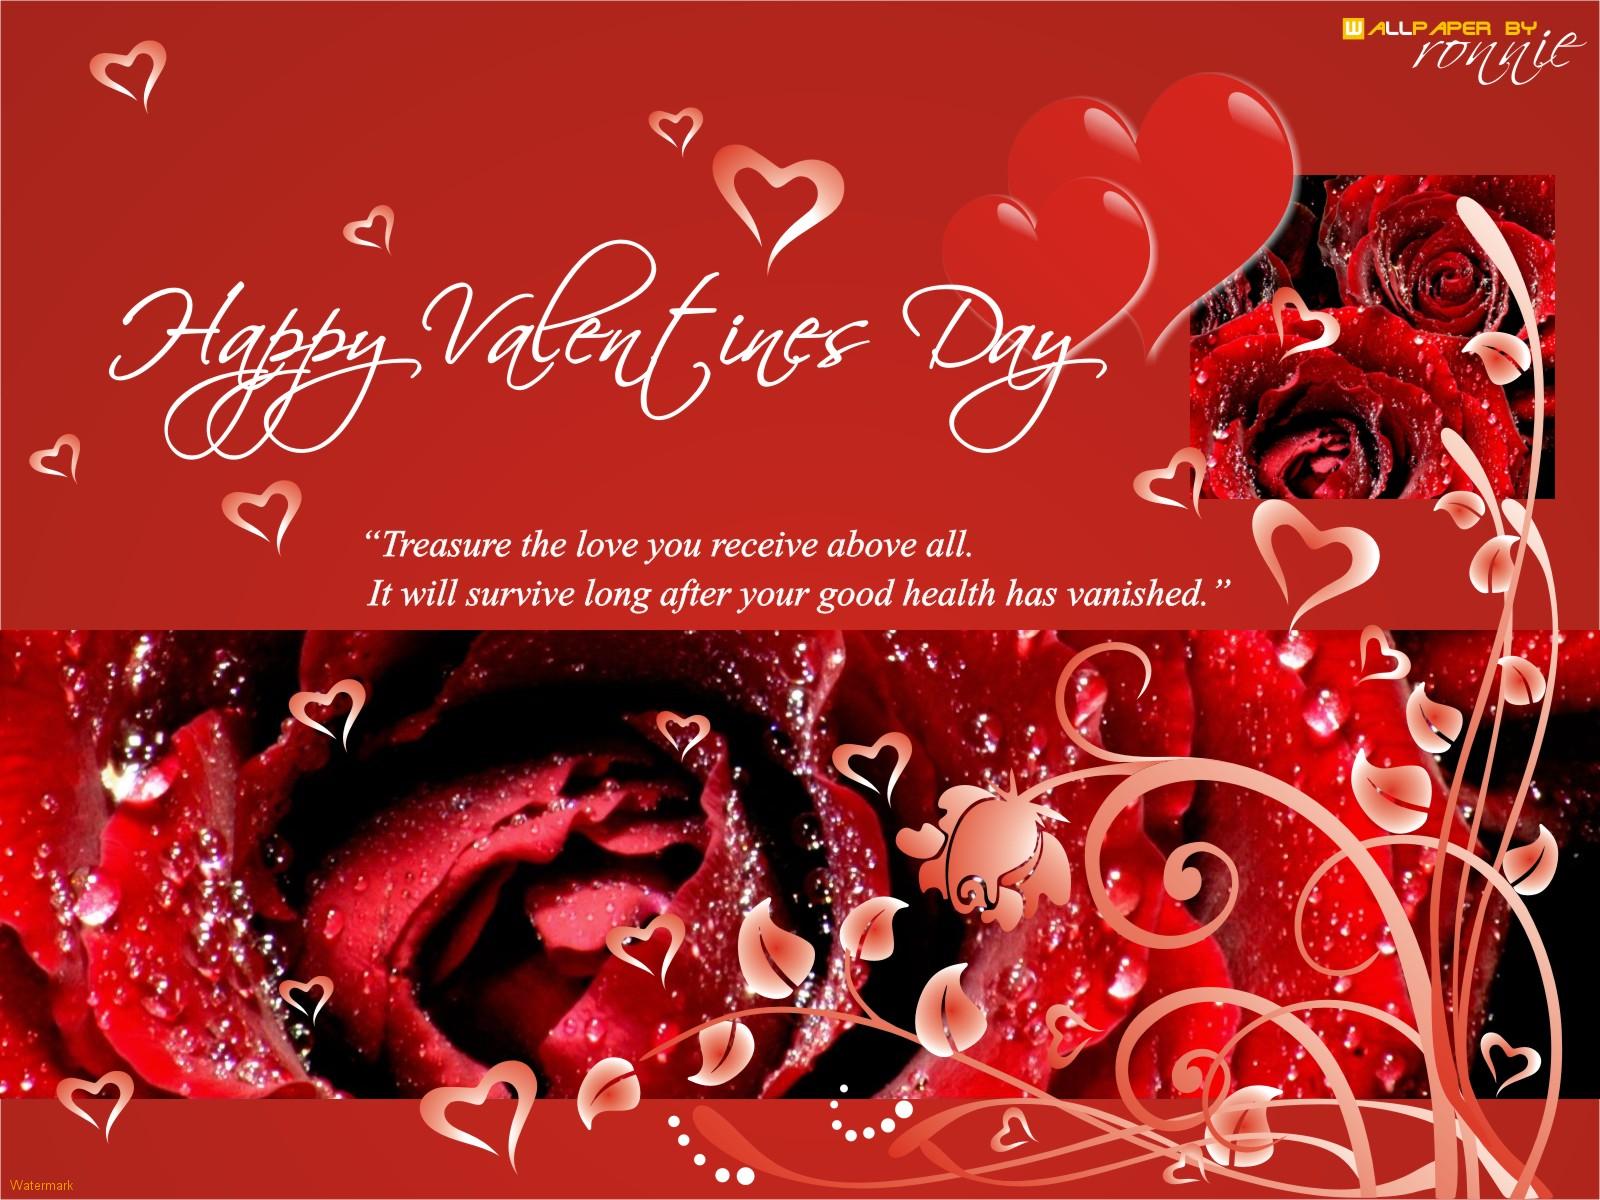 Wallpaper Backgrounds: Valentines Day Heart Wallpapers